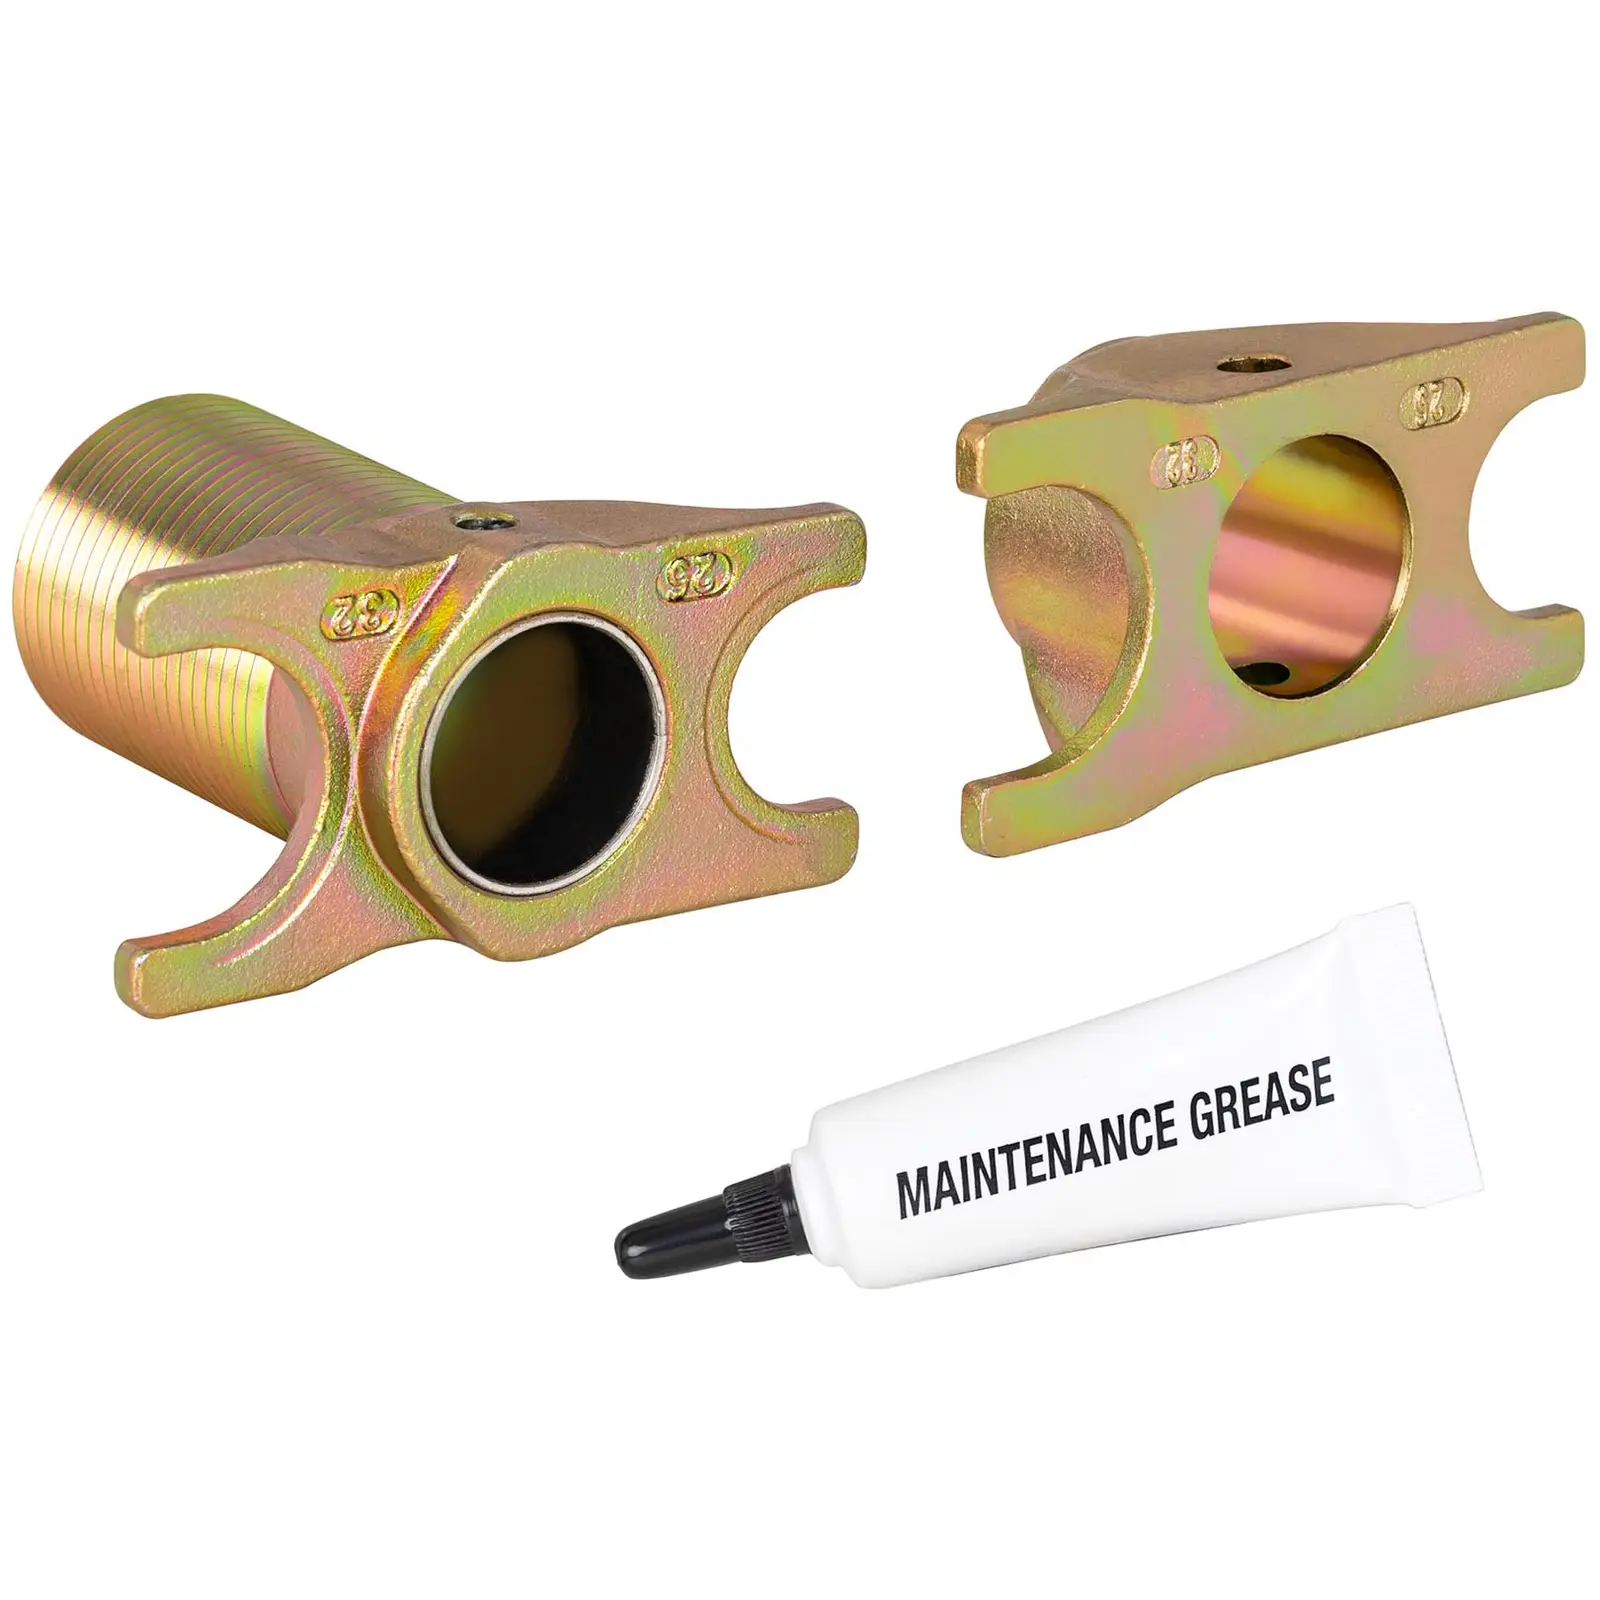 Pipe Installation Tool Kit - 16 to 32 mm